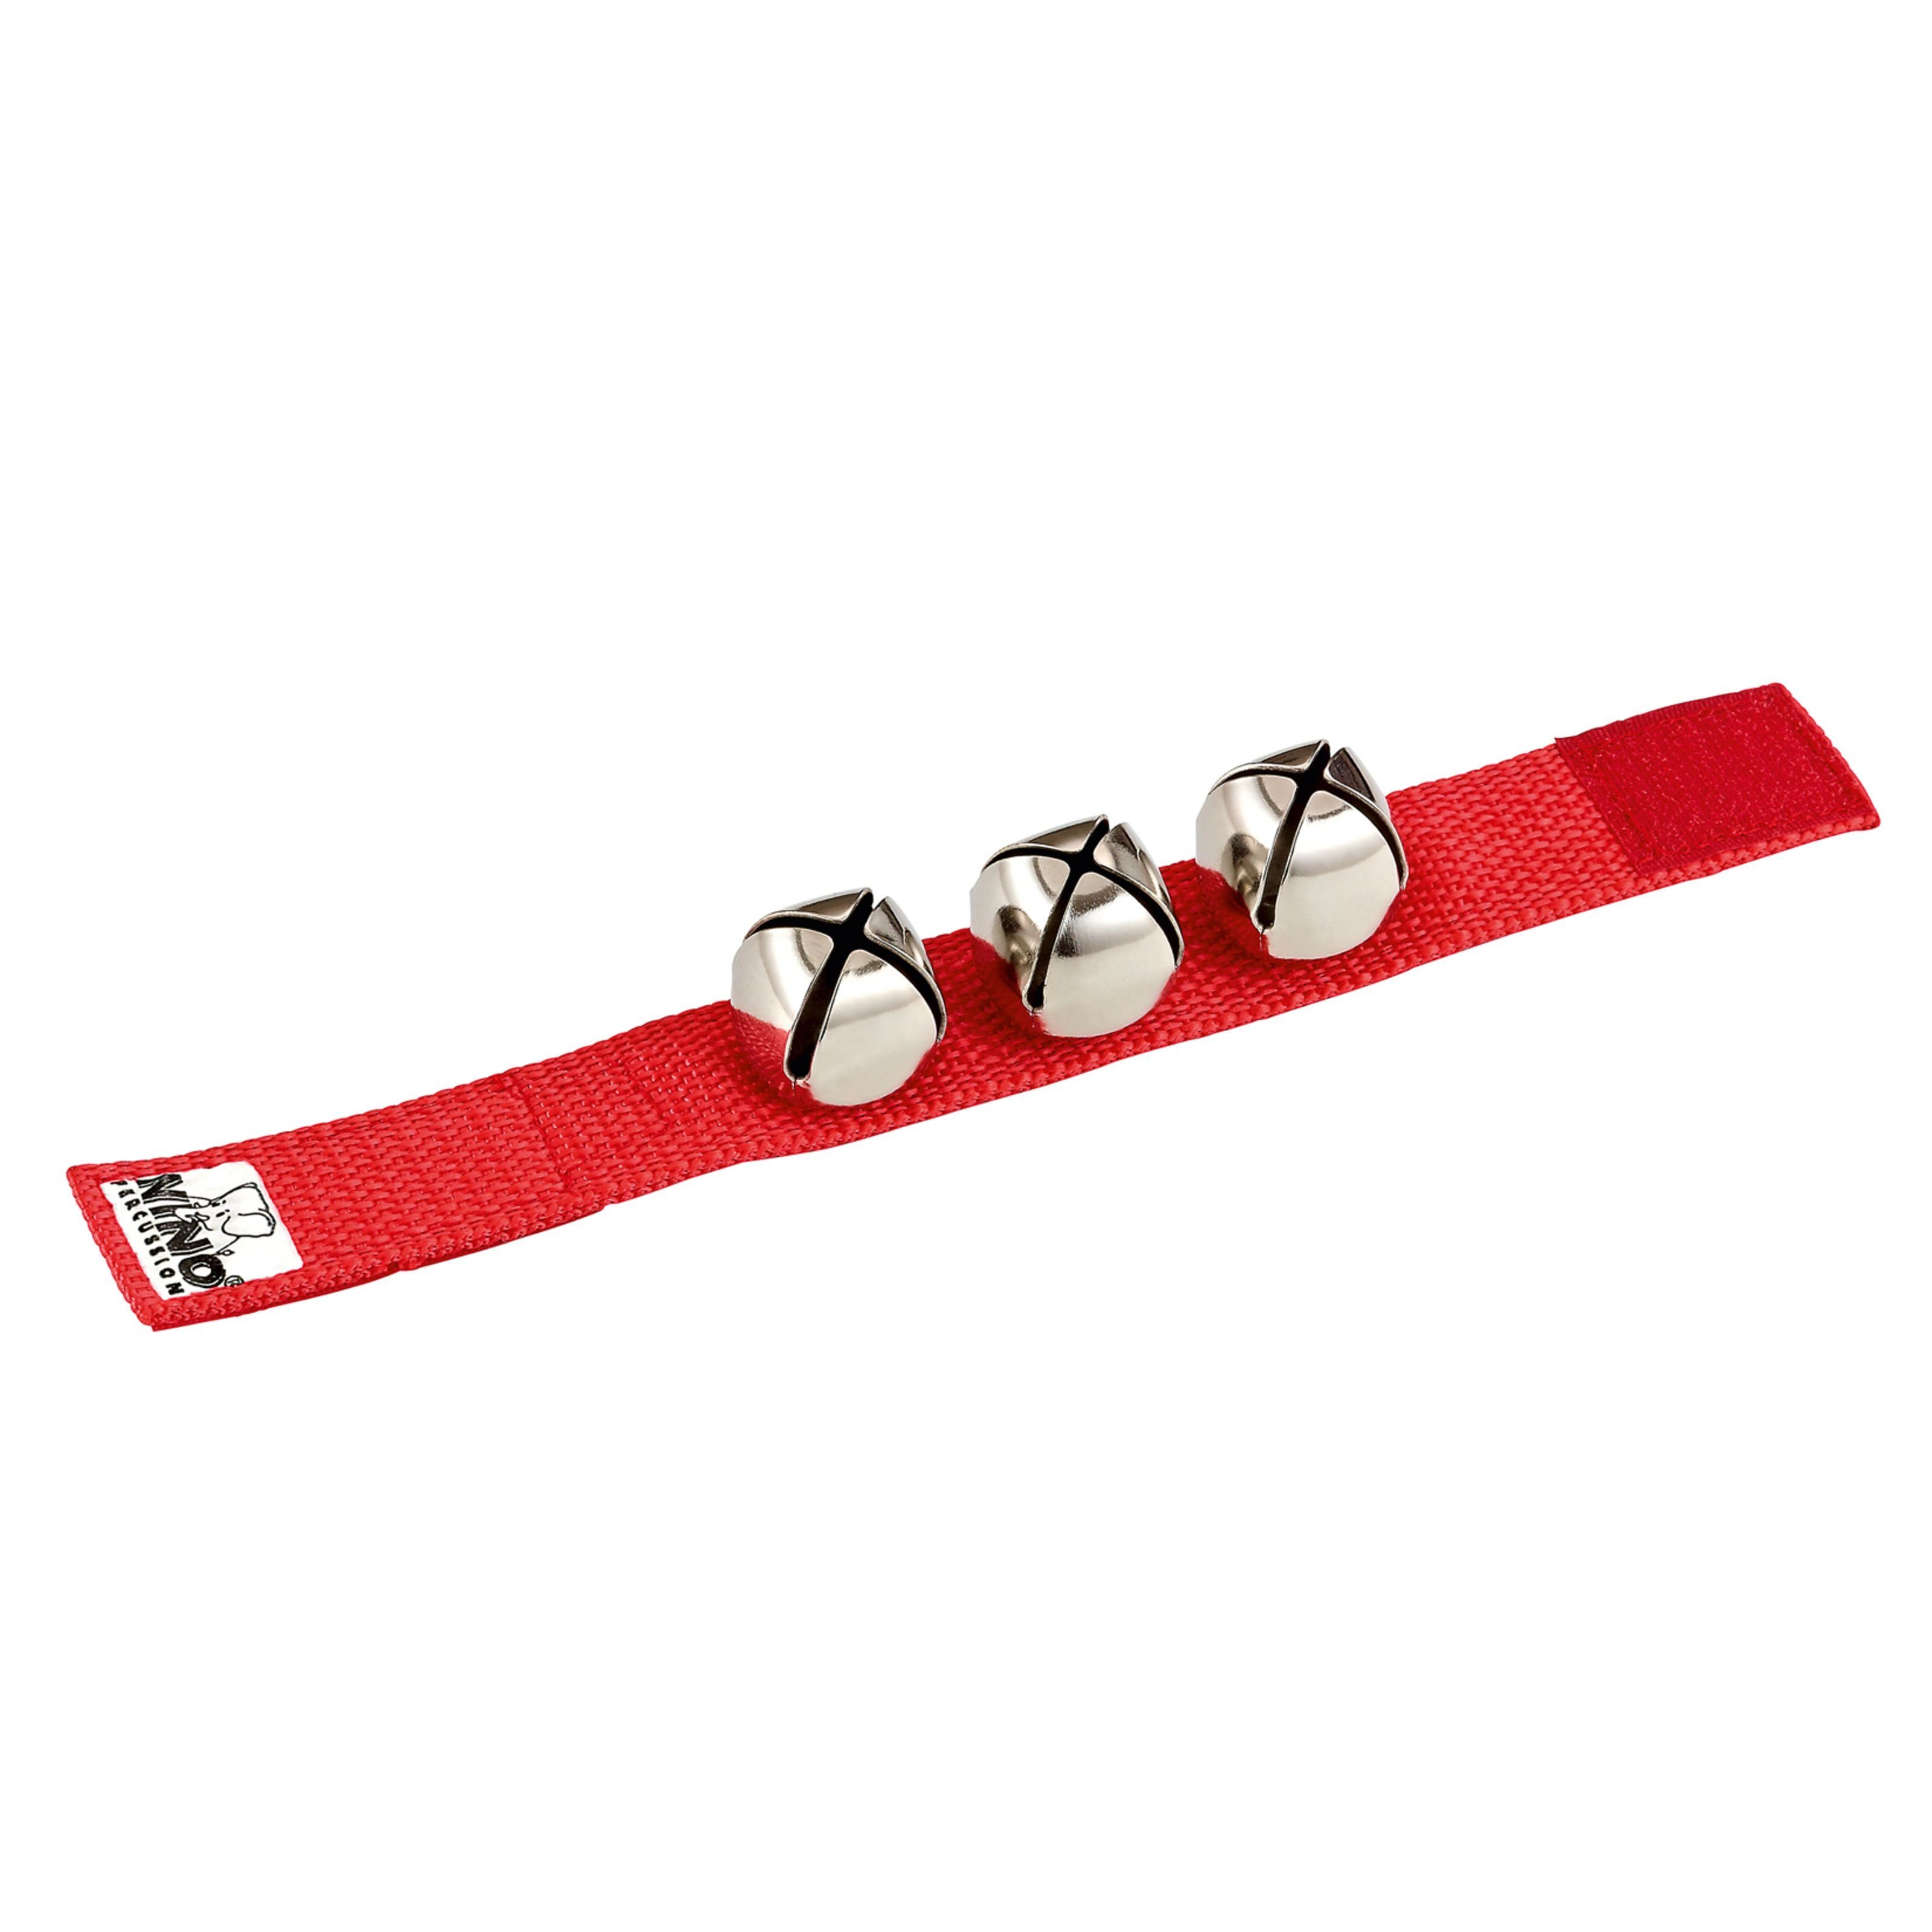 Meinl Percussion Schellenkranz, Drums for Kids, Hand Percussion, Wrist Bell NINO961R, Rot - Hand Percussion für Kinder